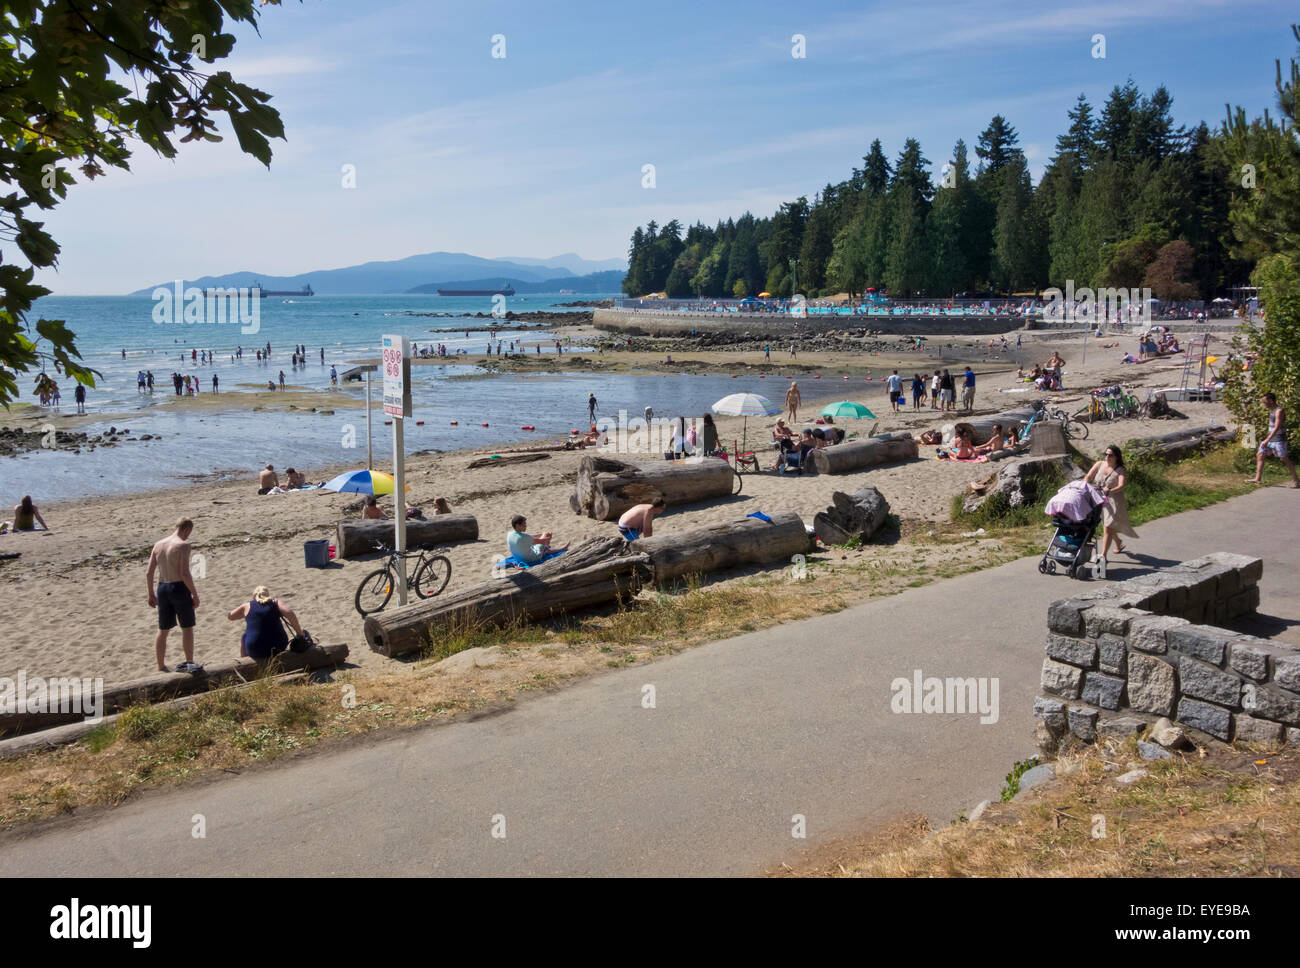 Seawall by Second Beach in Stanley Park, Vancouver.  People suntanning, swimming, and enjoying the water of English Bay. Stock Photo